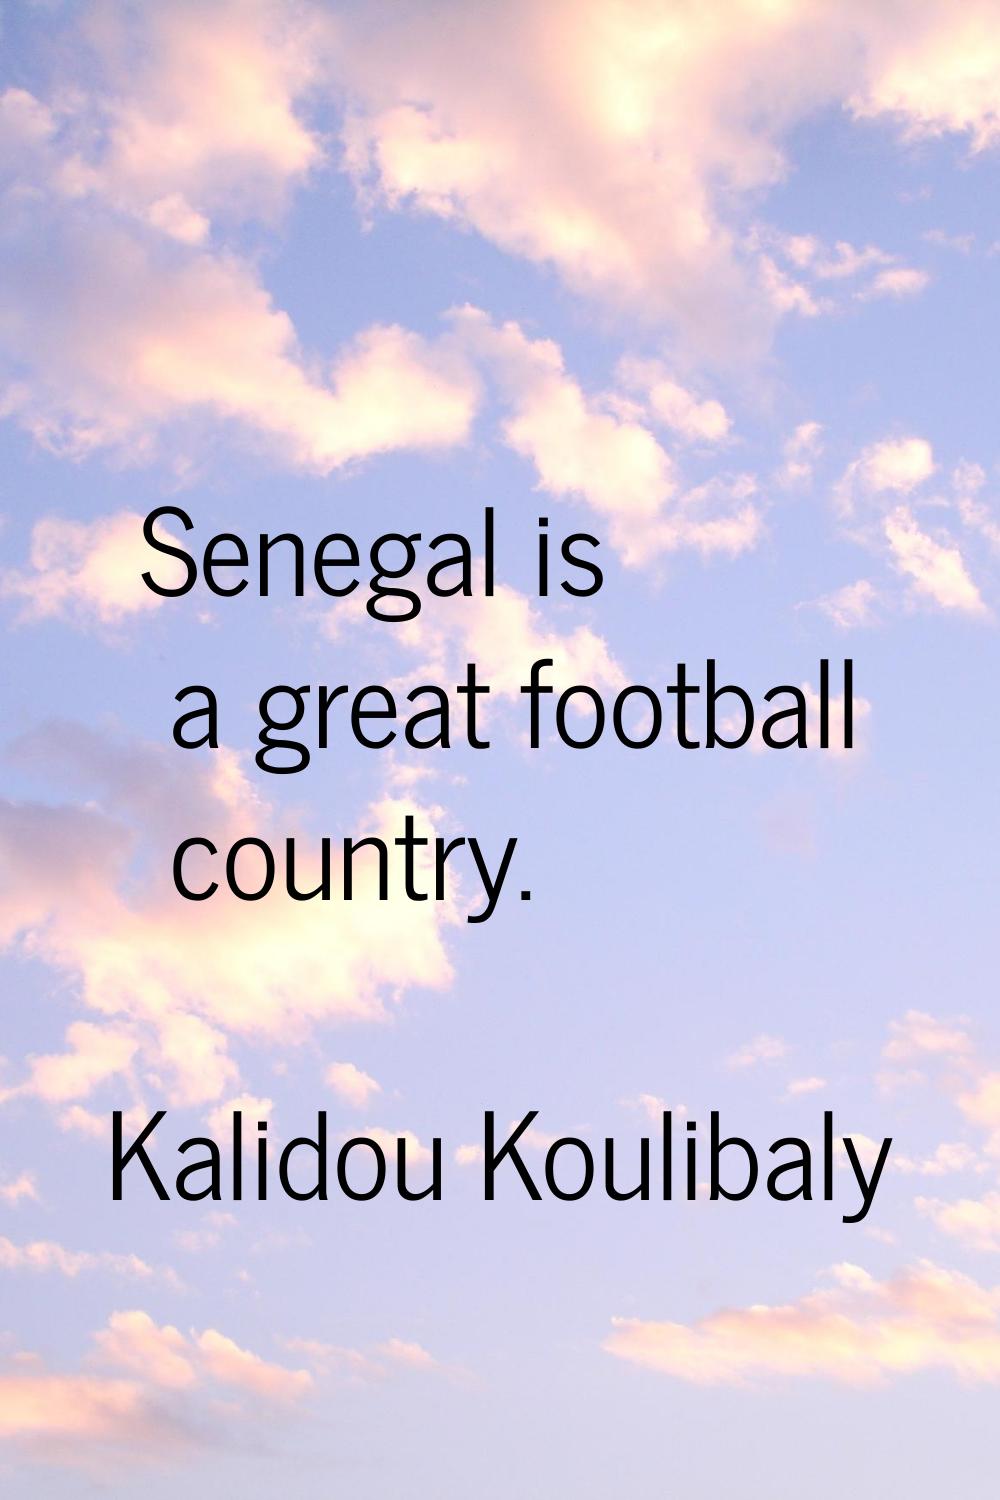 Senegal is a great football country.